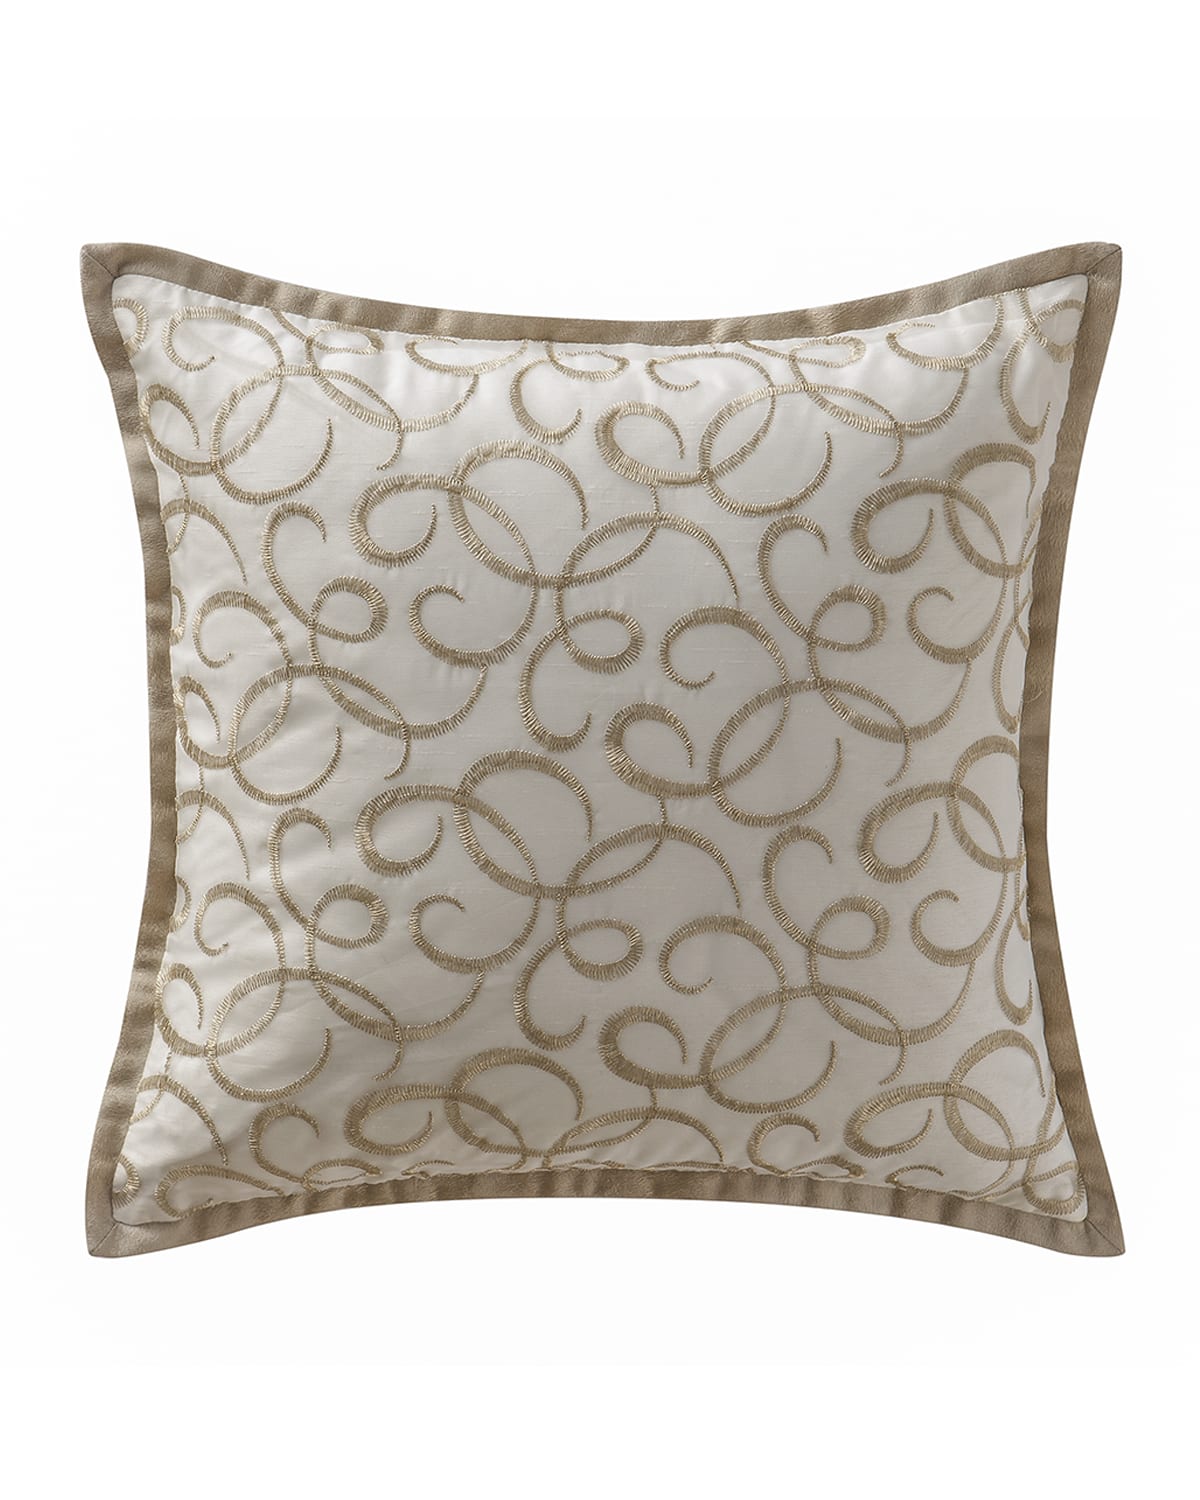 Image Waterford Chantelle Embroidered Pillow, 16"Sq.